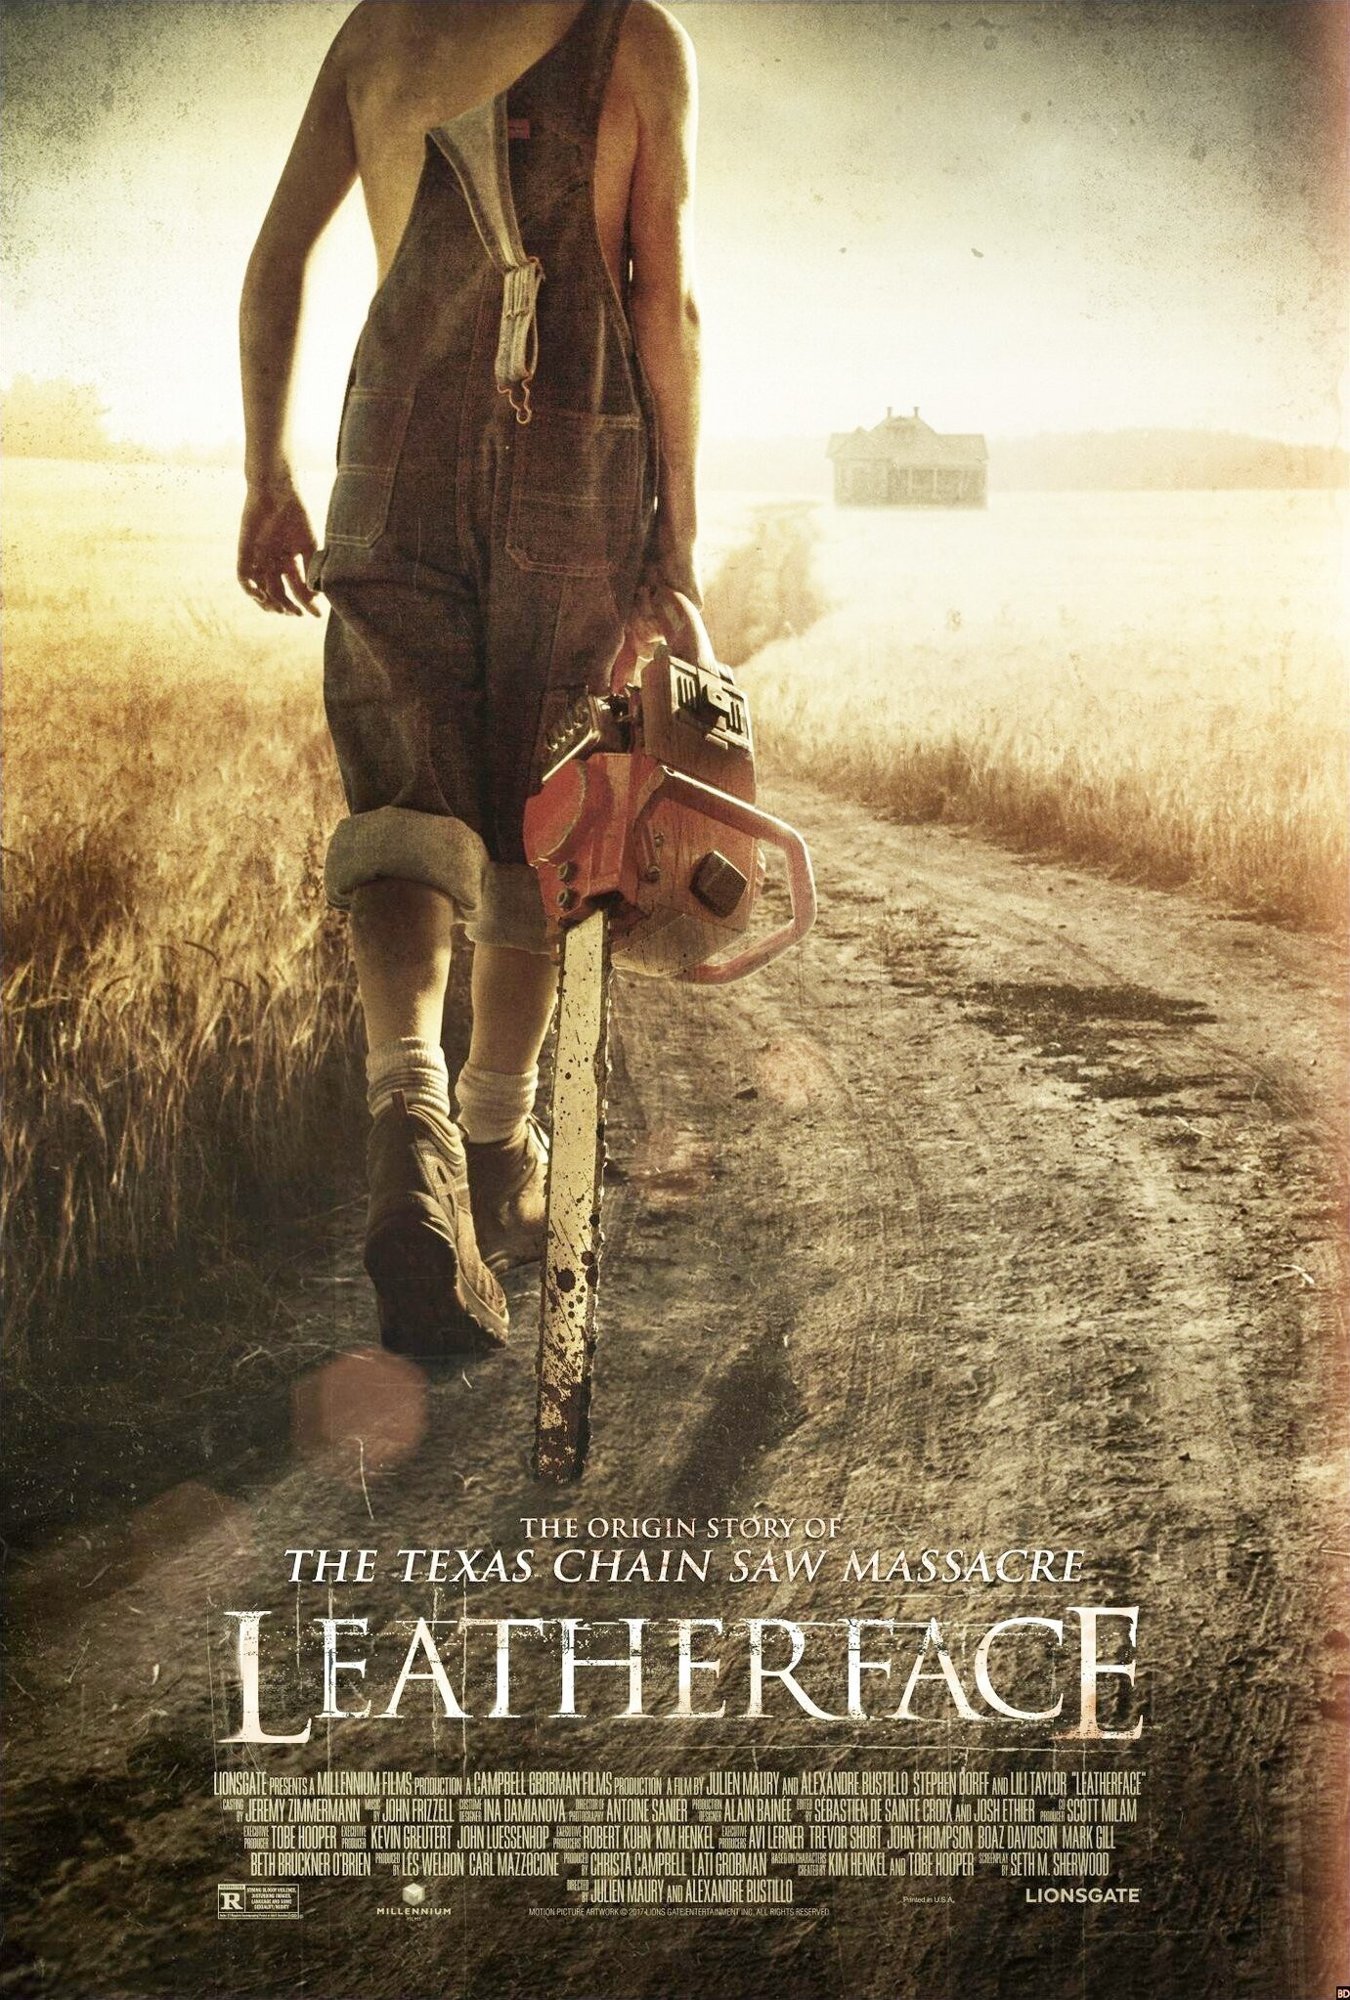 Leatherface (2017) Pictures, Photo, Image and Movie Stills1350 x 2000